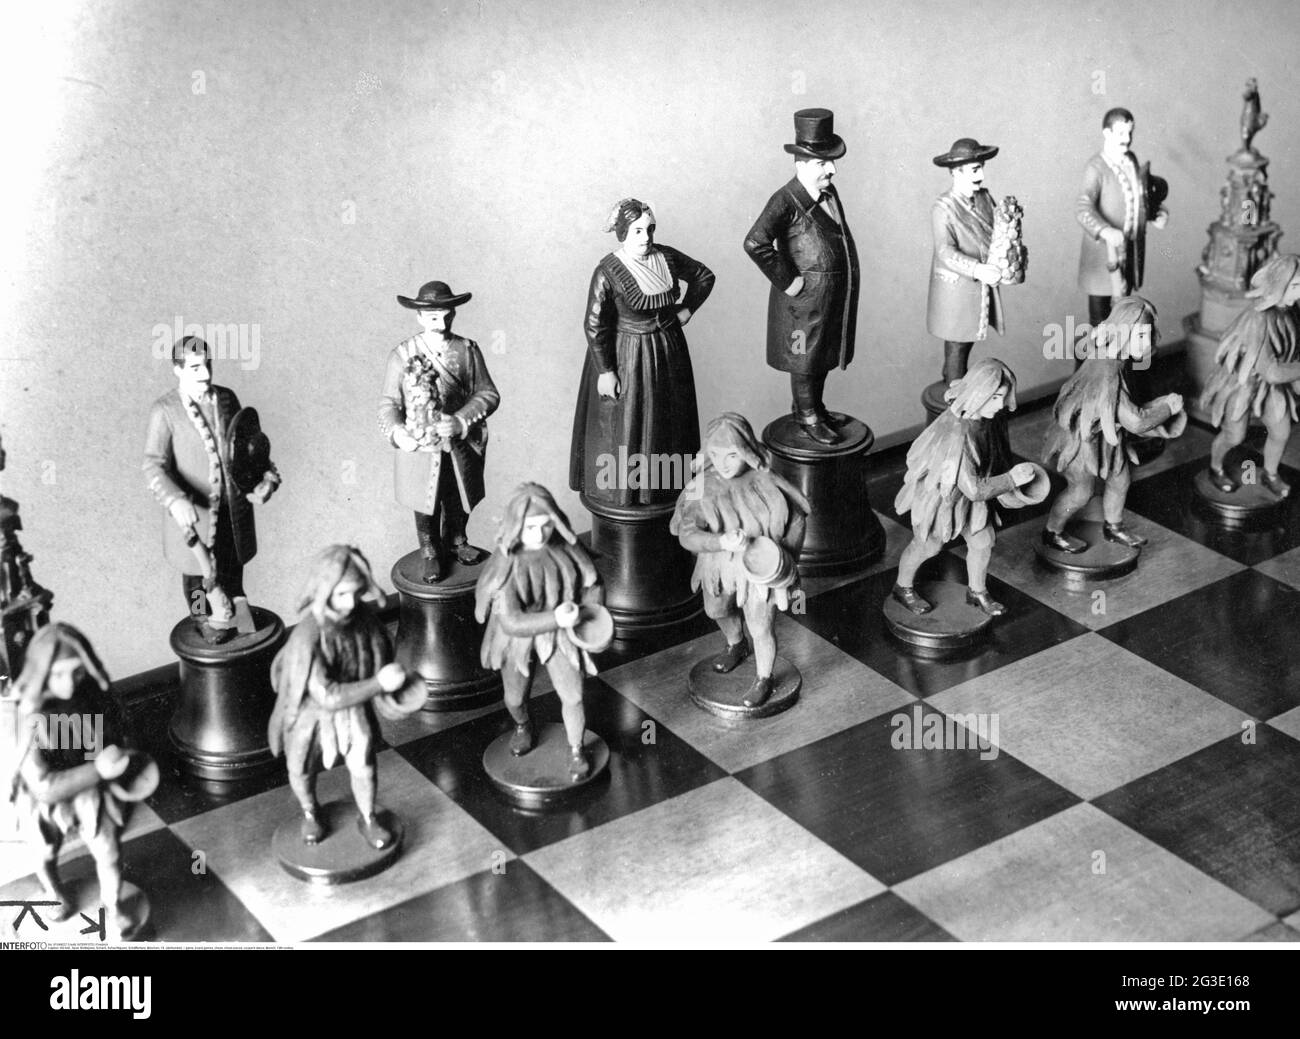 game, board games, chess, chess pieces, cooper's dance, Munich, 19th century, ADDITIONAL-RIGHTS-CLEARANCE-INFO-NOT-AVAILABLE Stock Photo